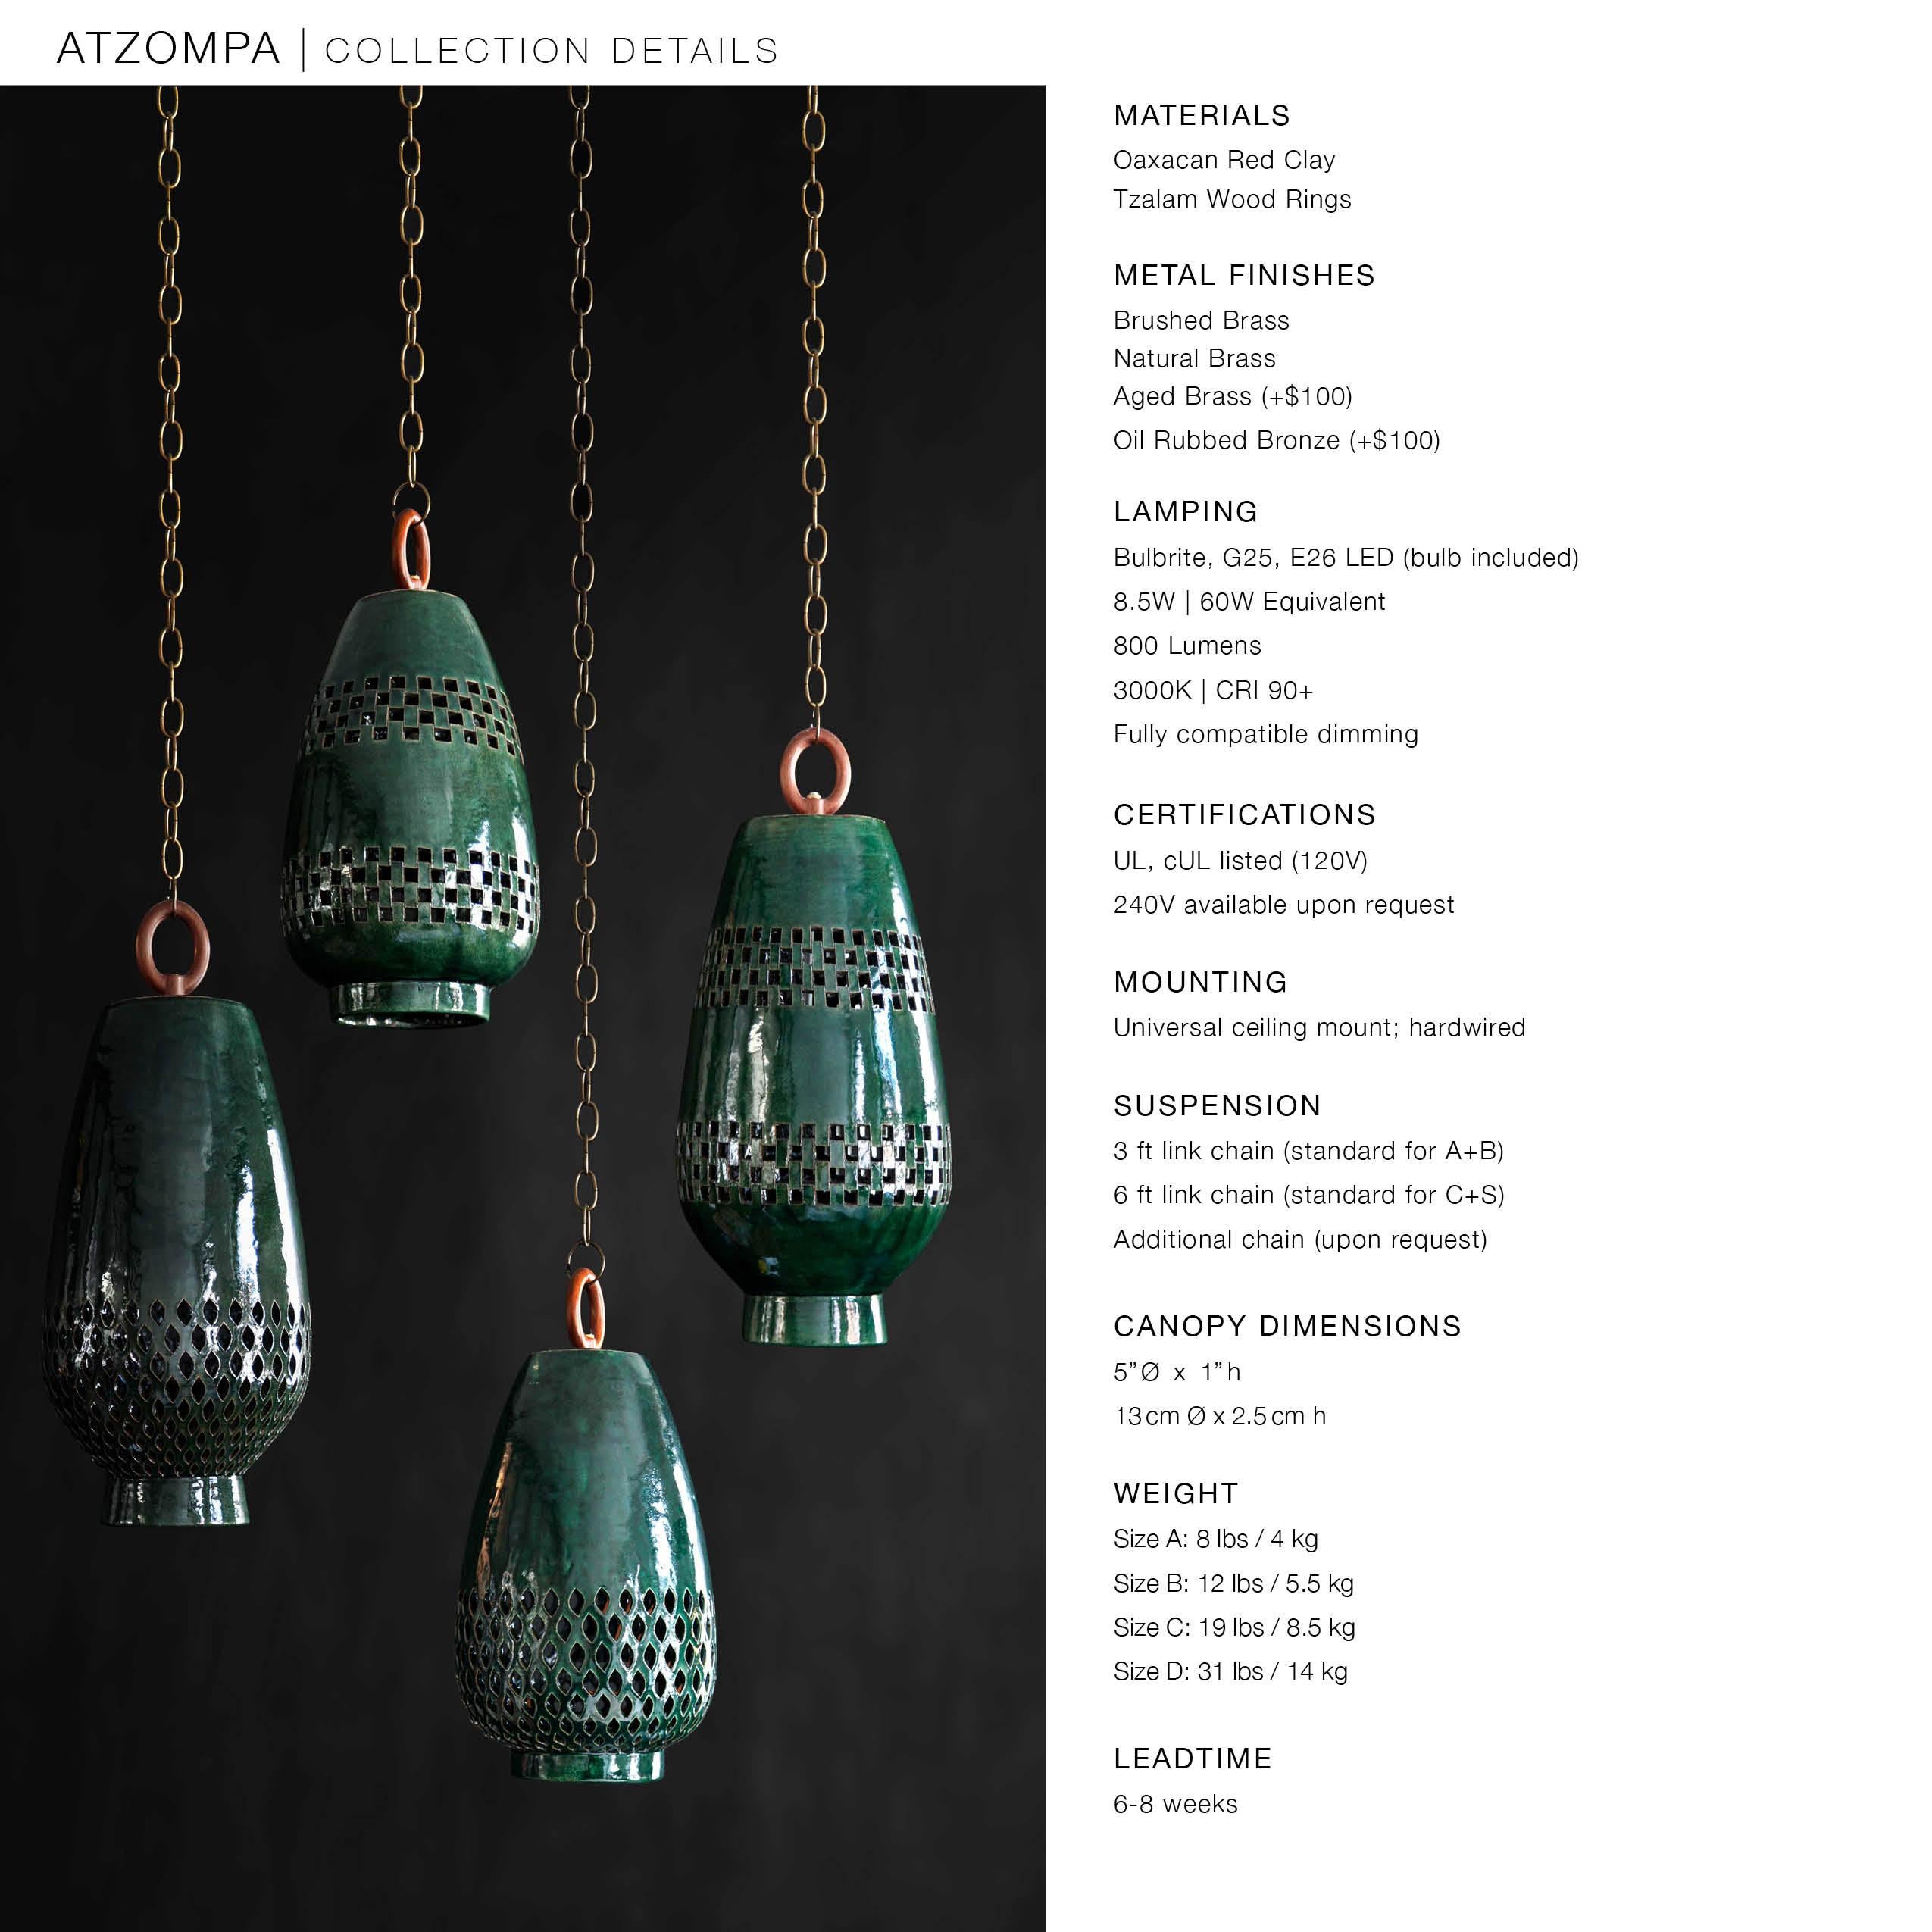 Emerald Ceramic Pendant Light XL, Aged Brass, Ajedrez Atzompa Collection  In New Condition For Sale In New York, NY